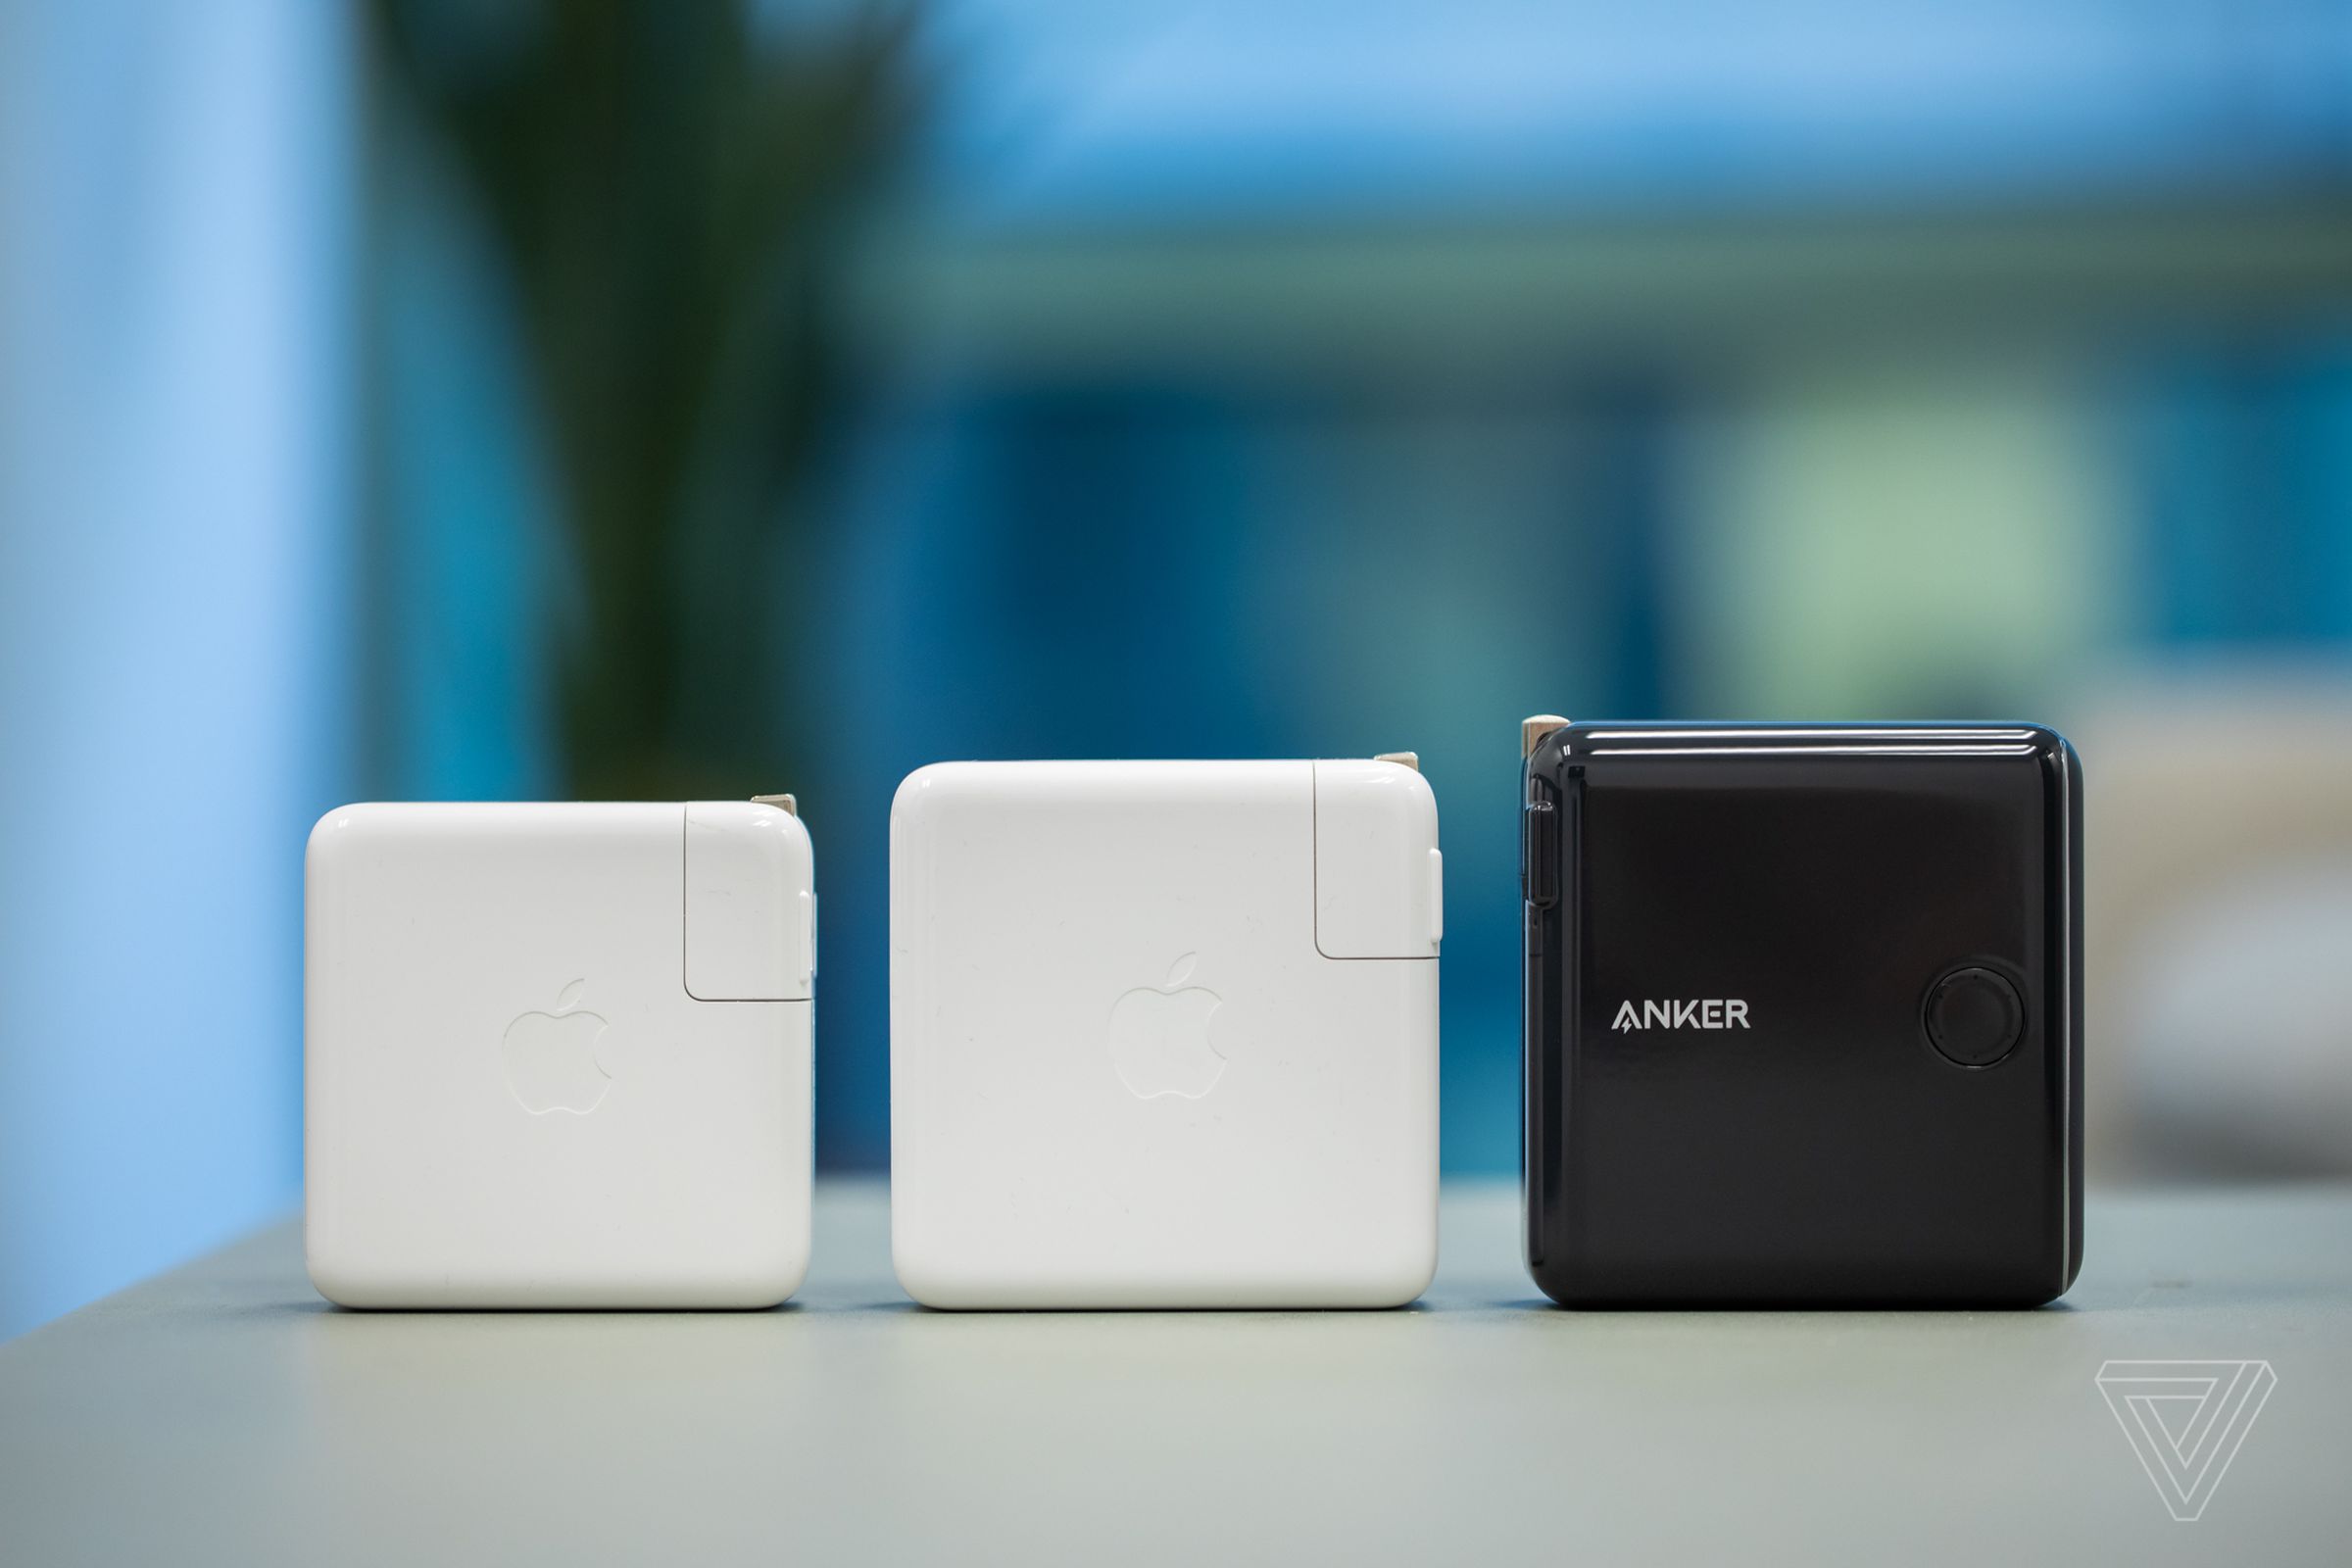 From left to right: Apple 61W adapter, Apple 87W adapter, Anker Powercore PD.